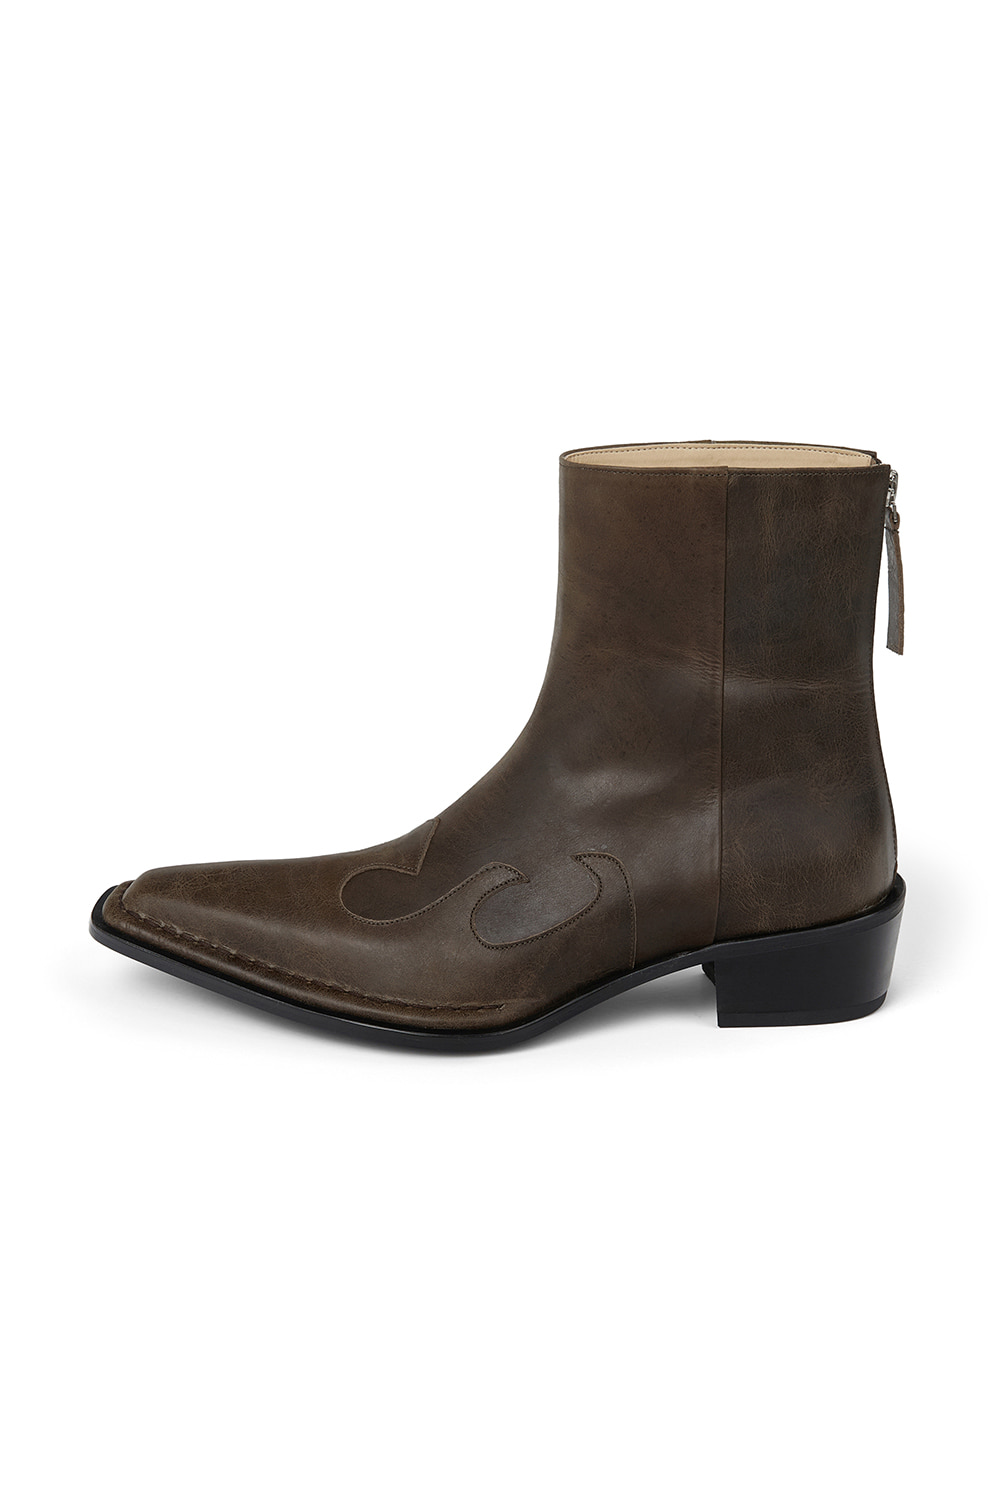 WESTERN ANKLE BOOTS [KHAKI BROWN]		